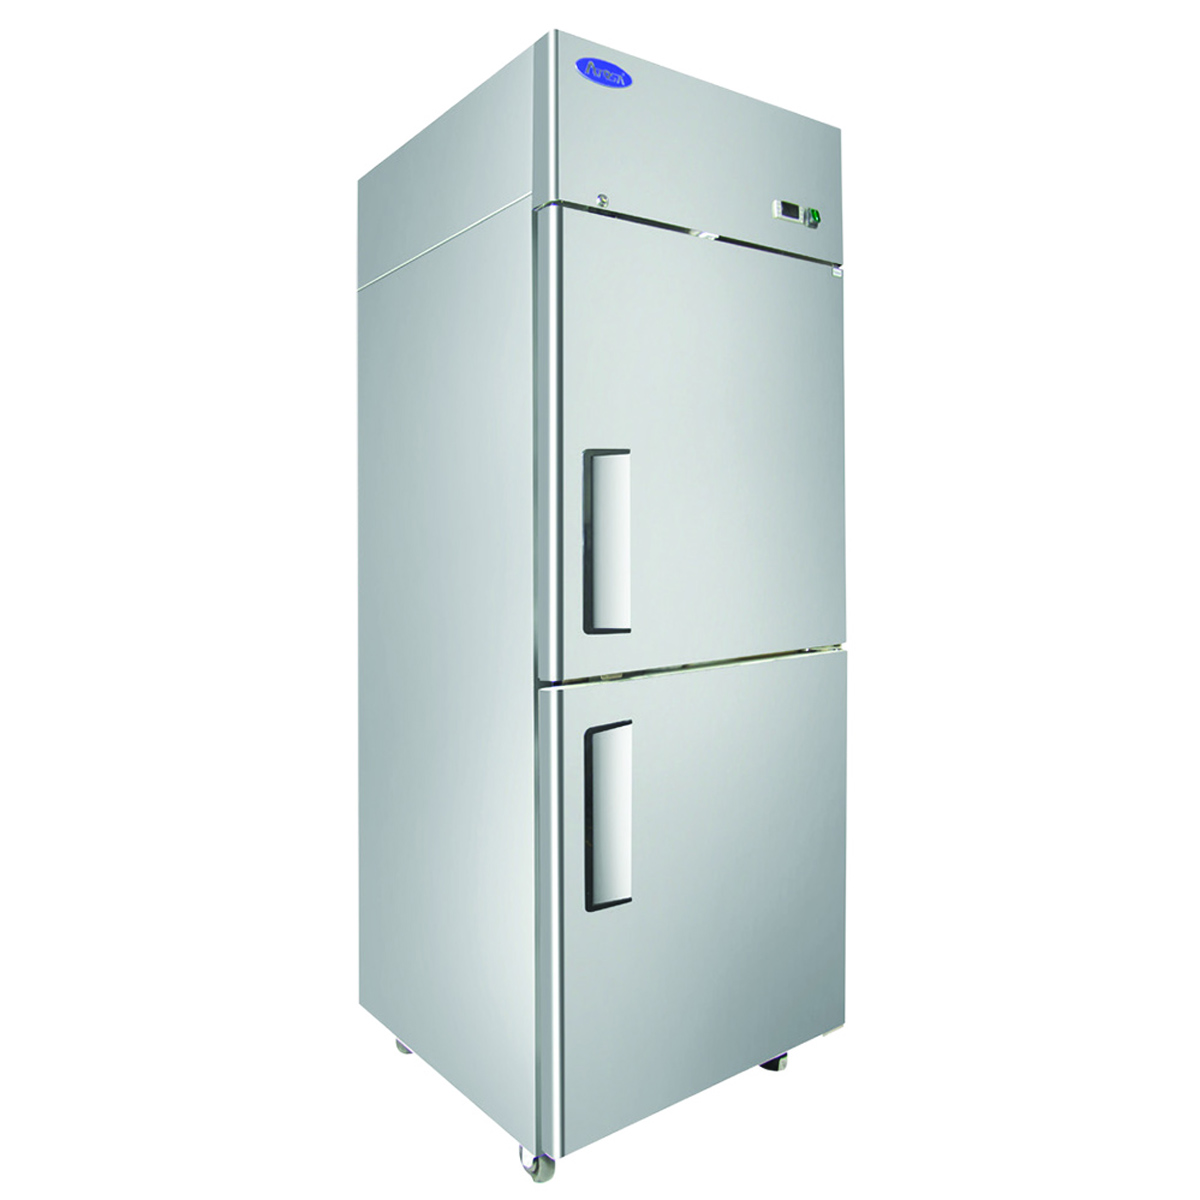 Atosa MBF8007GR Top Mount Self Contained Freezer 28-3/4"W x 31-1/2"D x 81-1/4"H w/2 Locking Solid Half Doors - Right Hinged